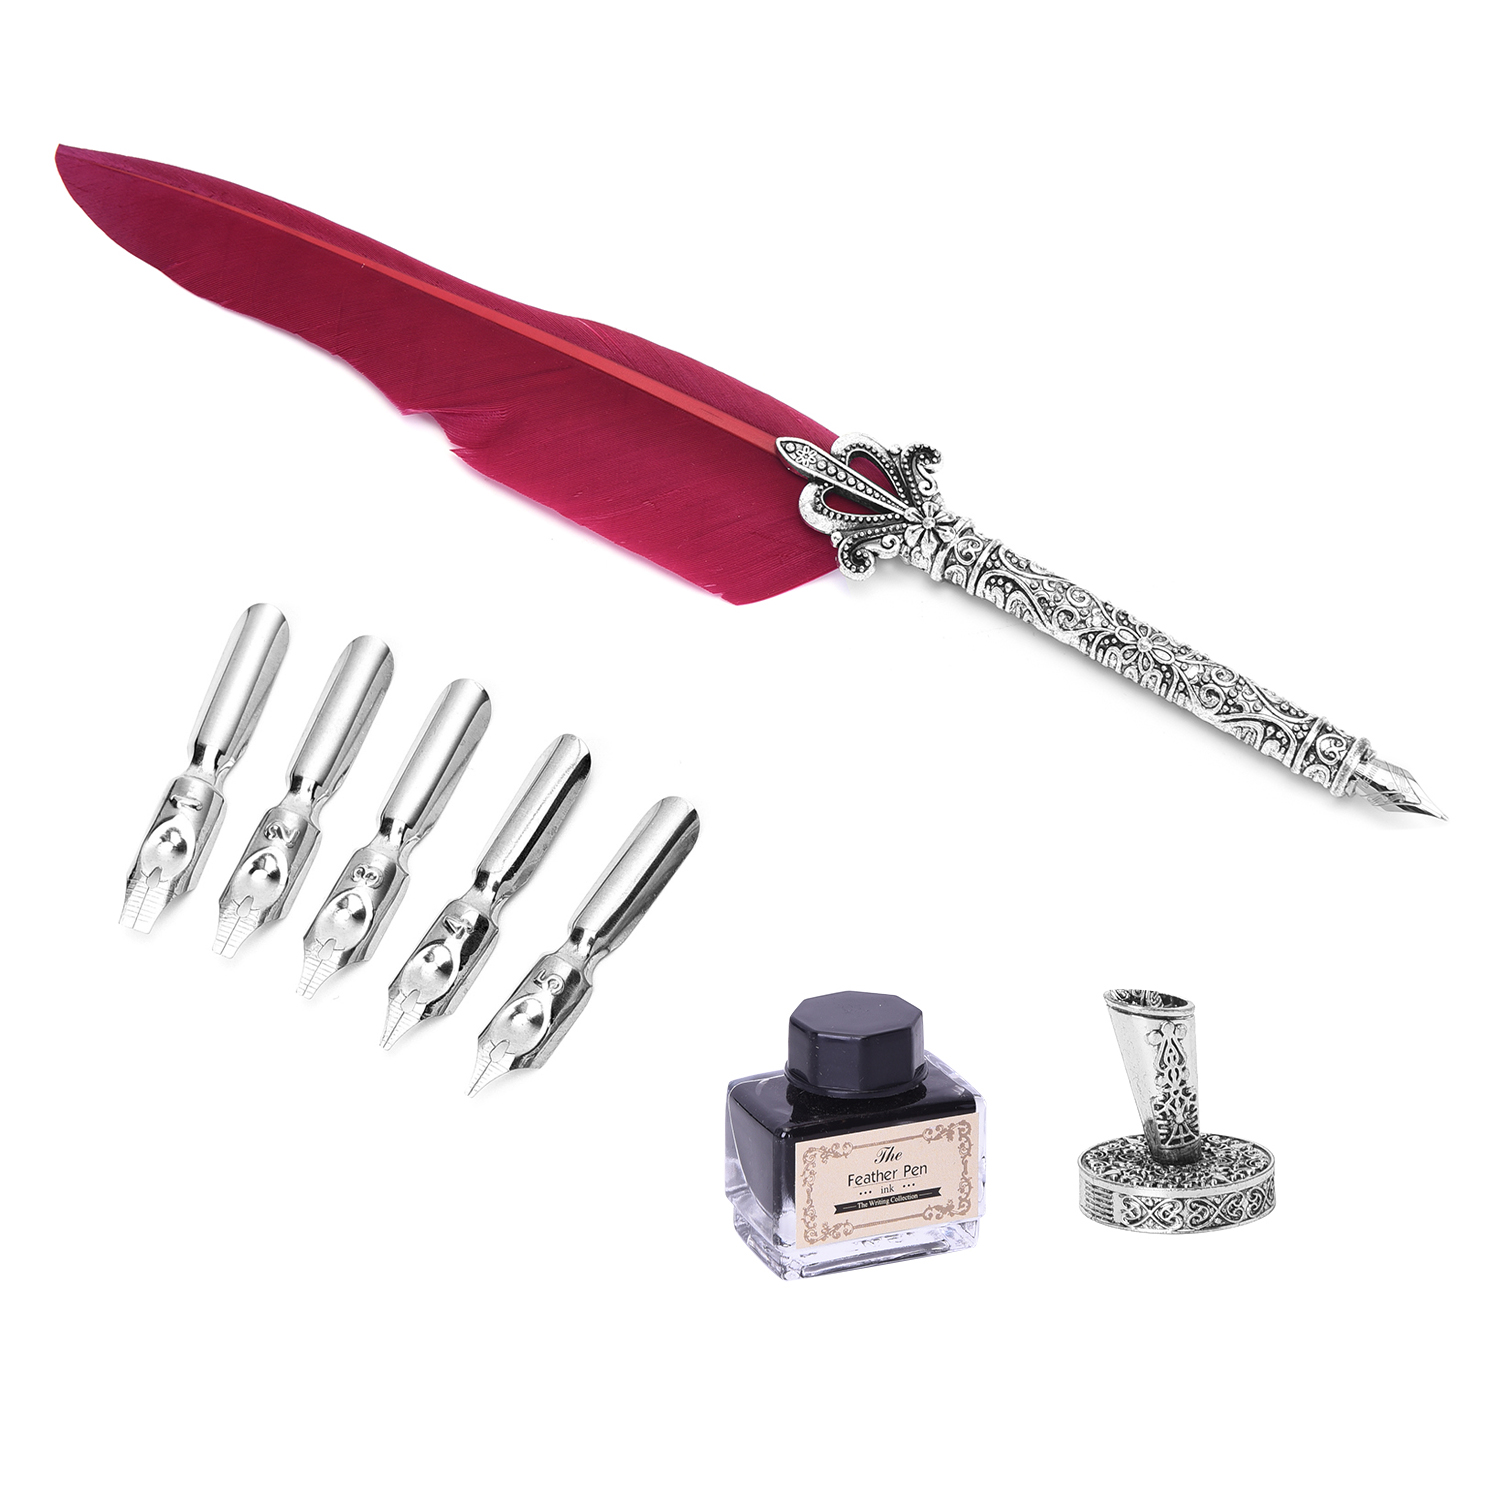 Set of Burgundy Feather Pen with Pen Stand, Black Ink (15ml) and 6-Different Nip Shapes in Silver Tone